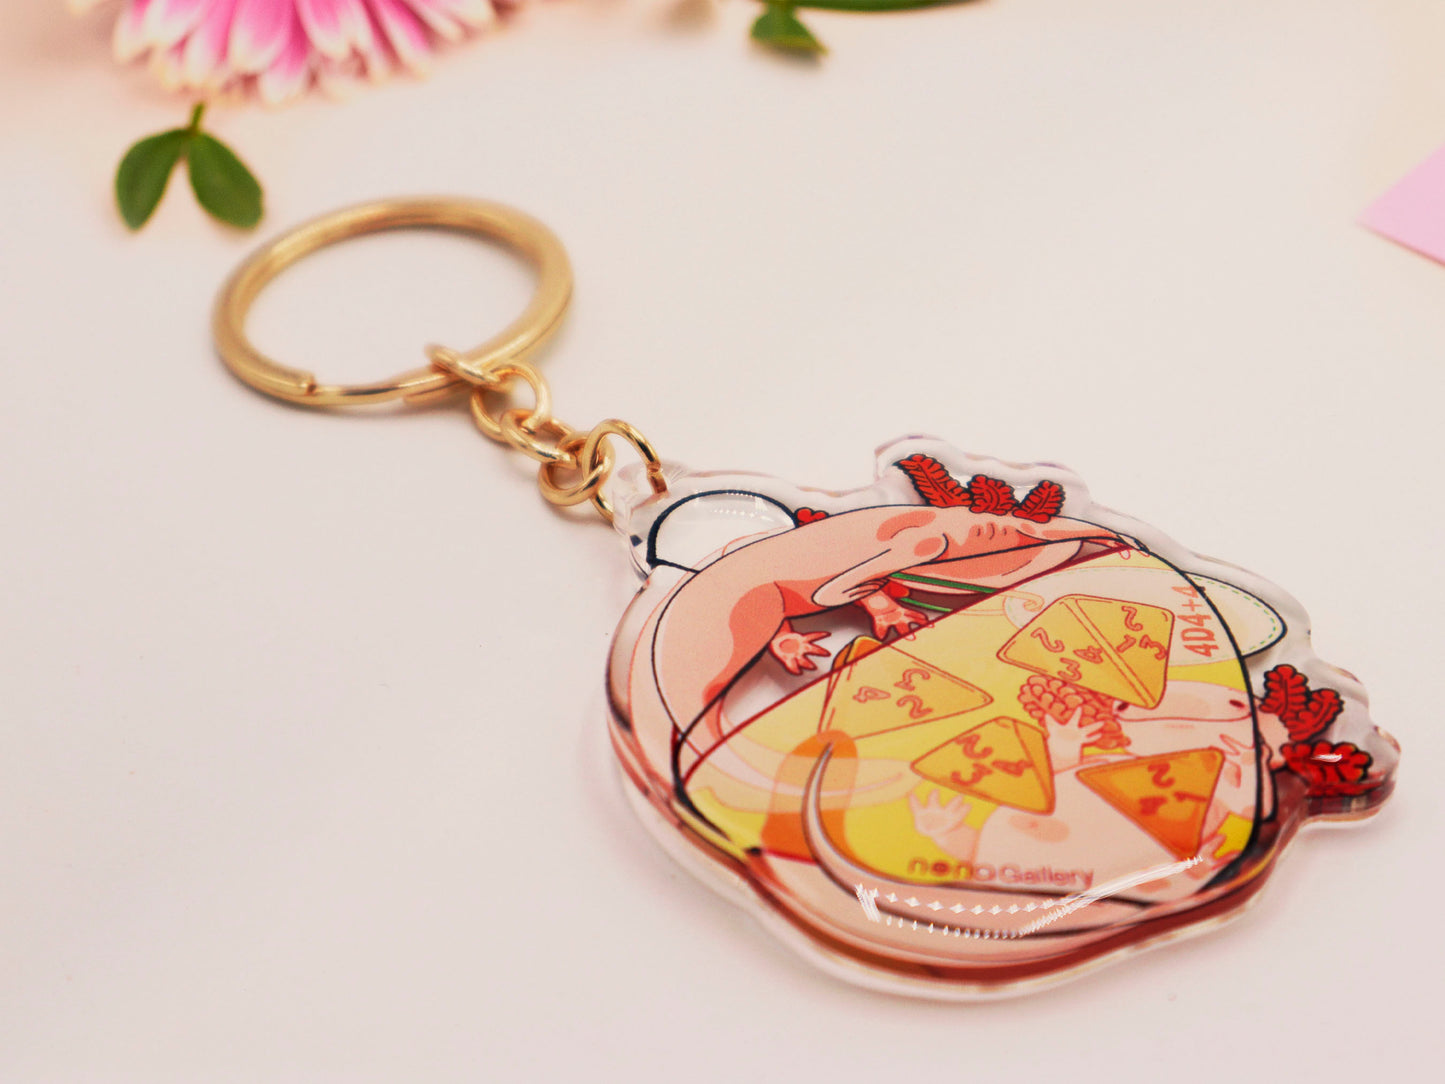 Clear acrylic double sided gold clasp keychain with a cartoon illustrated design of two pink axolotls on a potion bottle labelled health +hp and with a yellow liquid and four orange d4 dice inside.